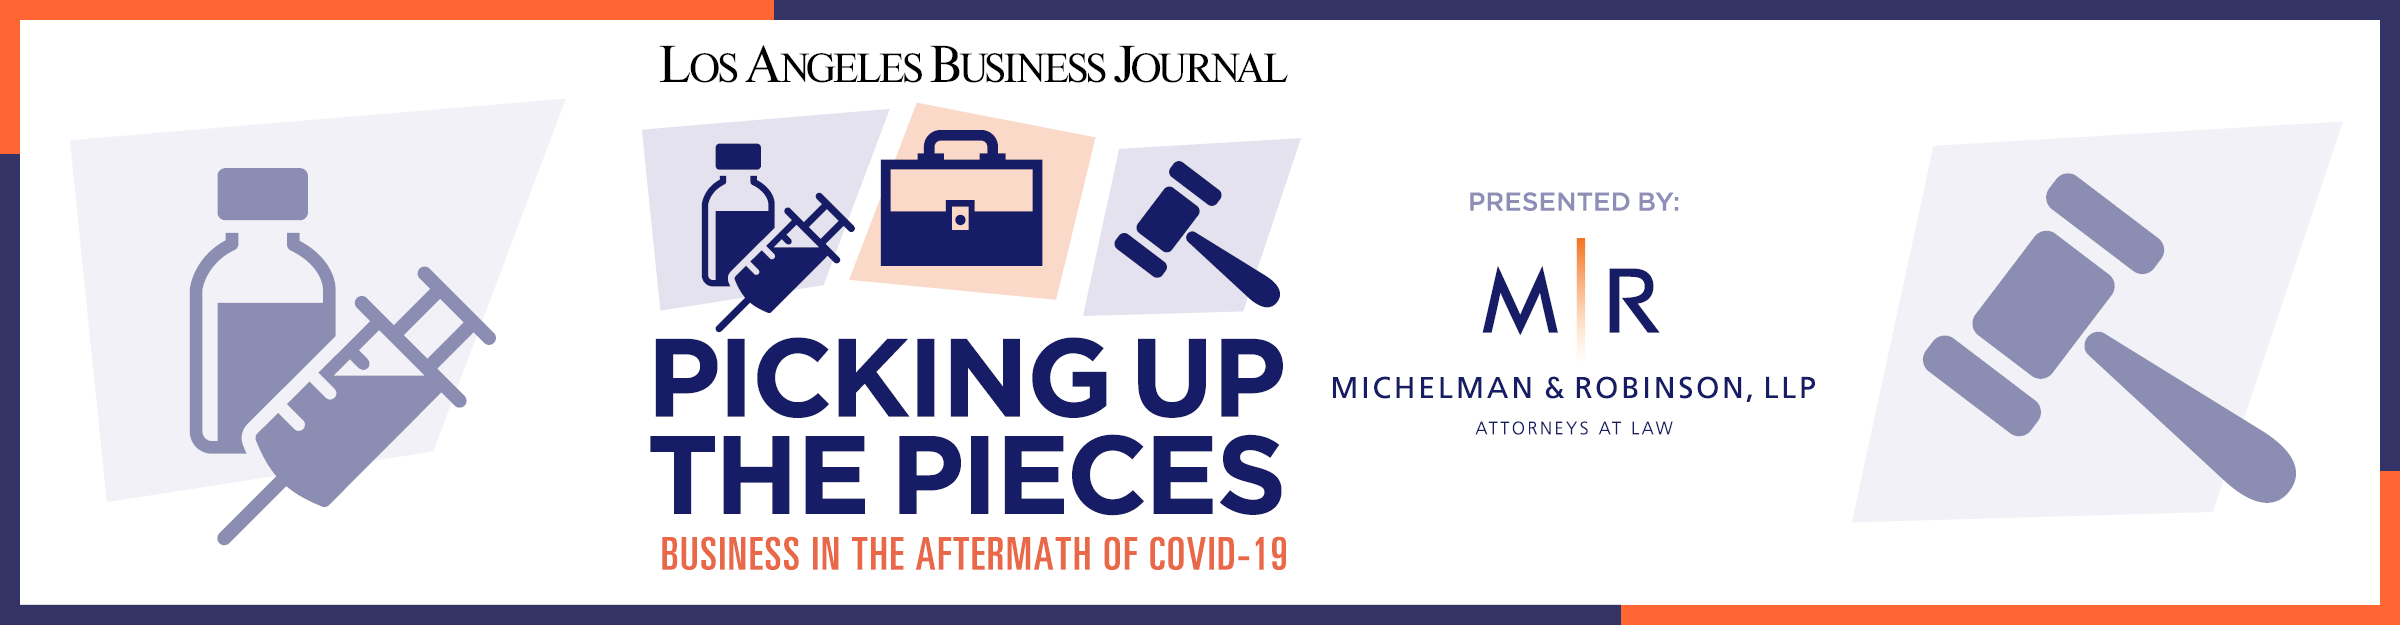 Los Angeles Business Journal Picking Up the Pieces: Business in the Aftermath of COVID-19 Event Banner